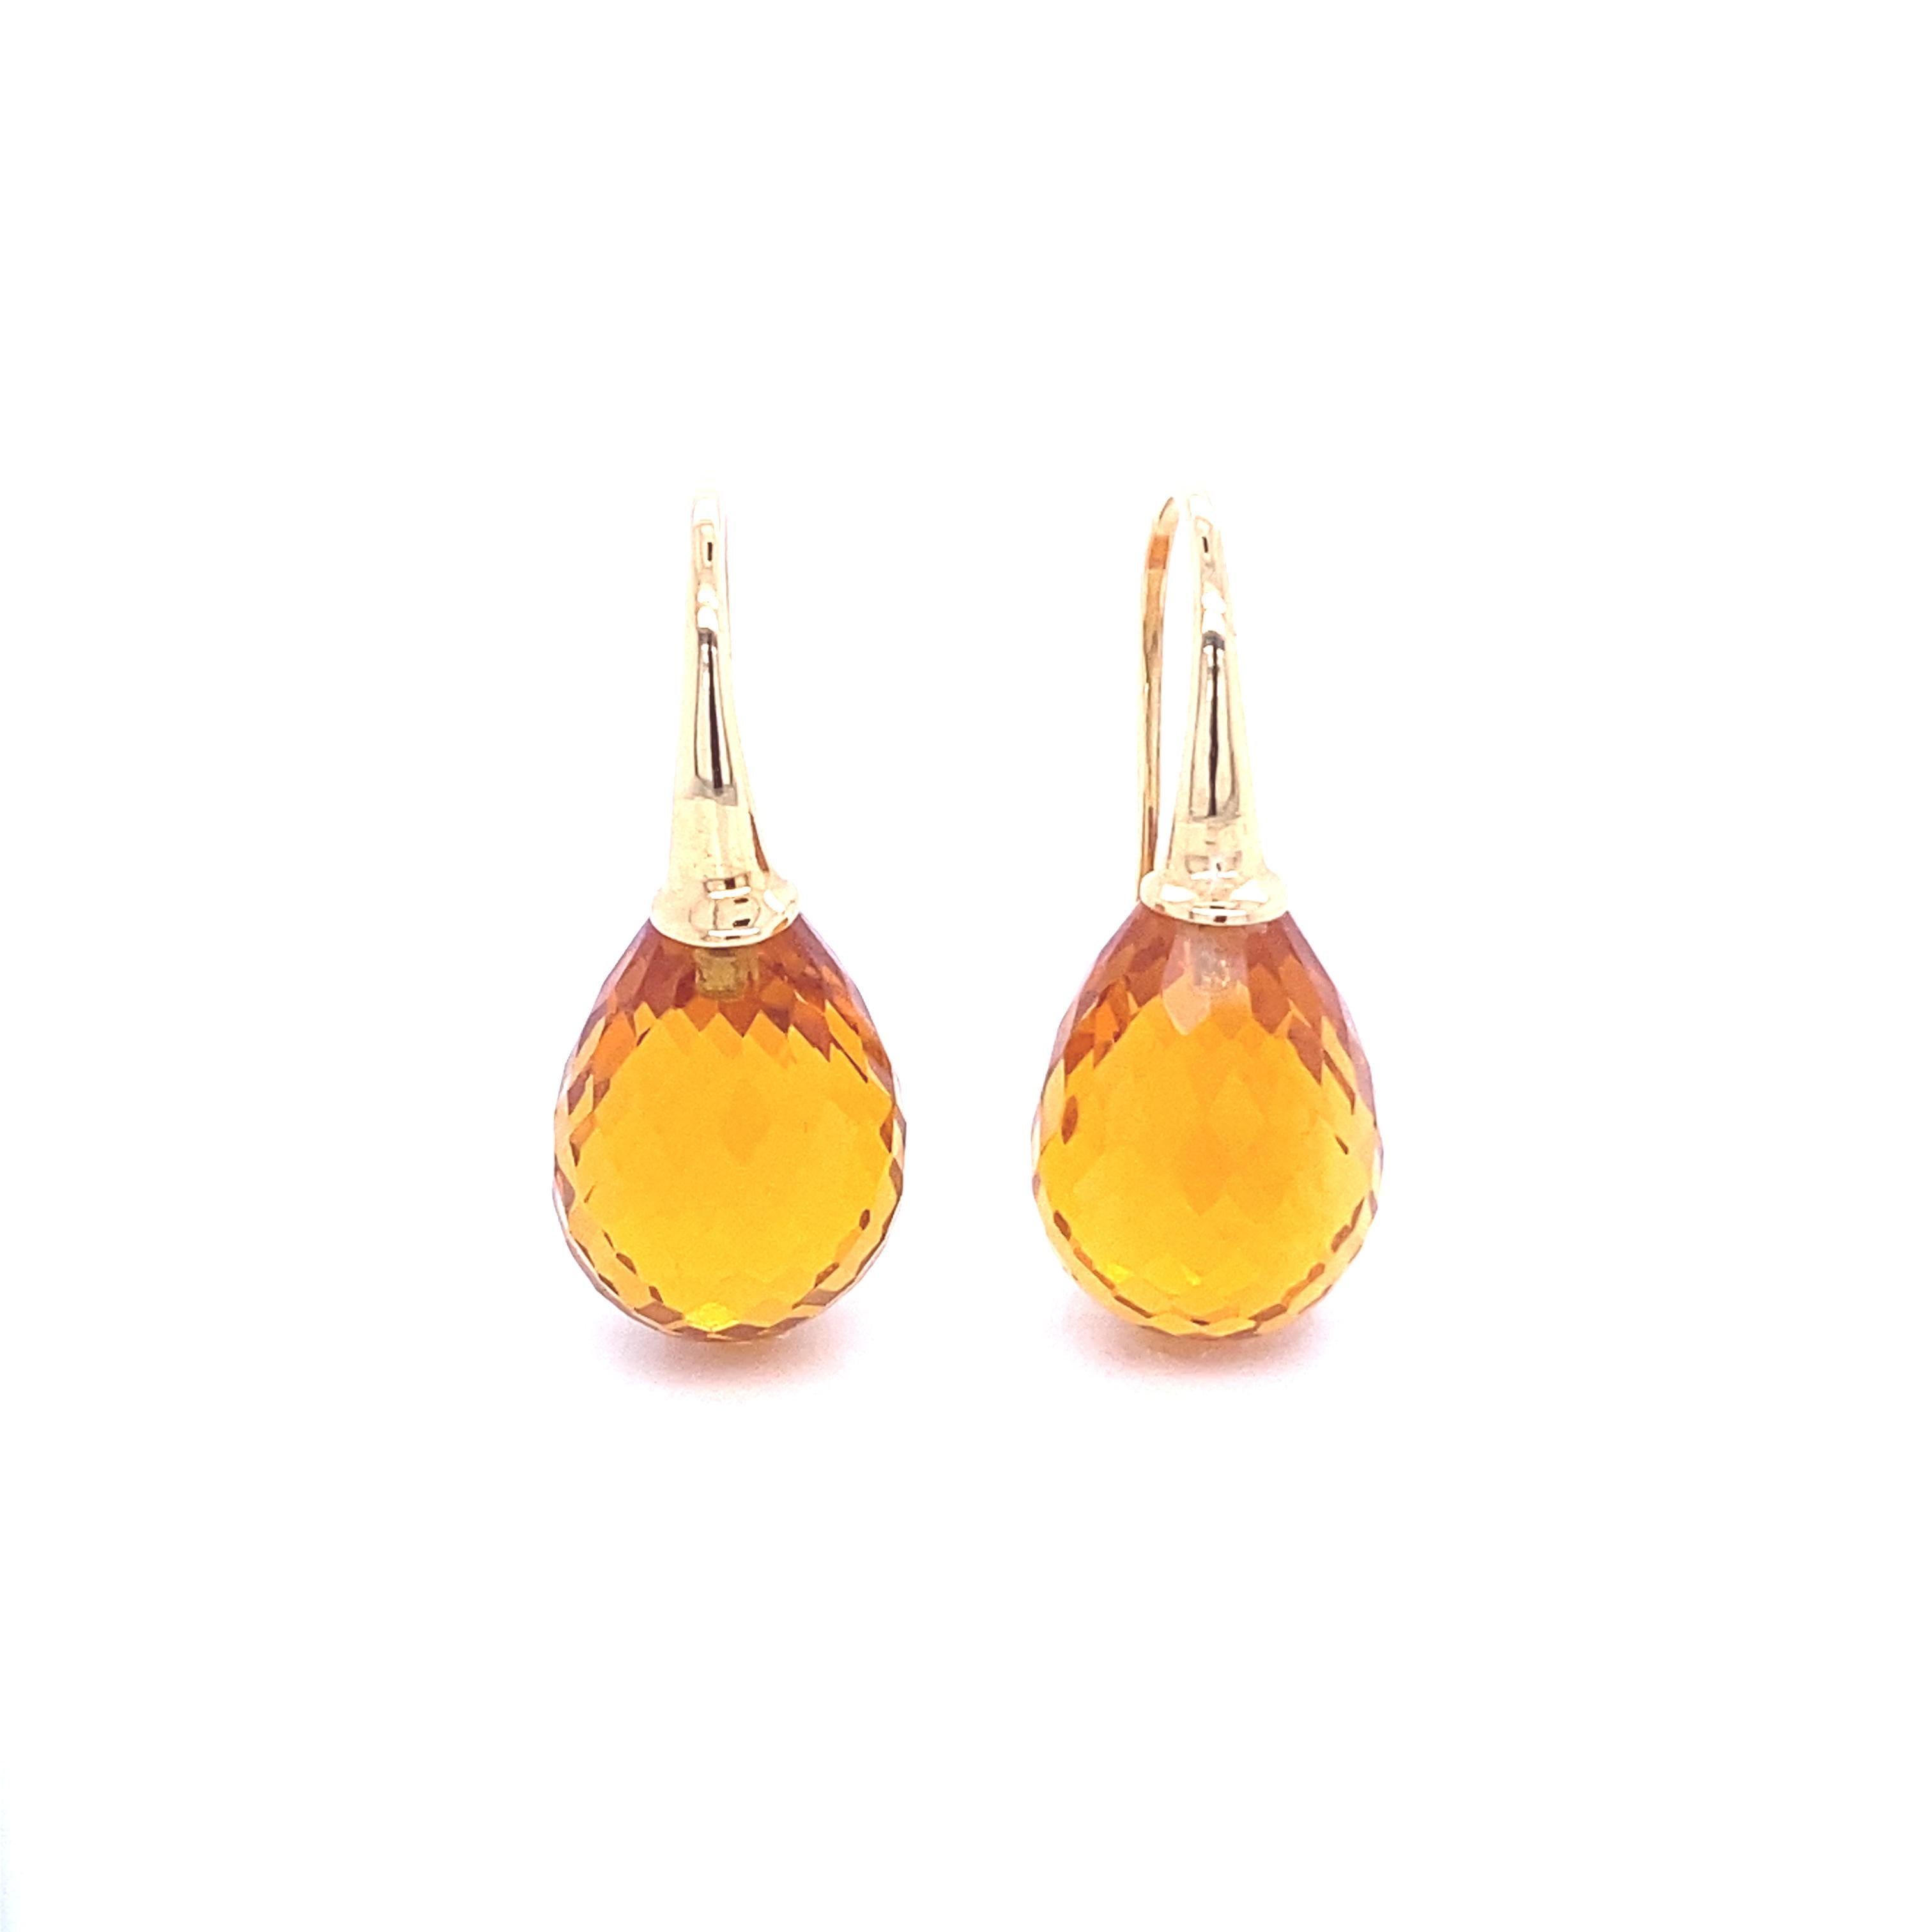 Discover these magnificent 18-carat yellow gold dangling earrings, accompanied by a hydro citrine, from the French collection of Mesure et Art du Temps. These earrings are a true jewel of style and elegance, bringing a touch of luminosity and